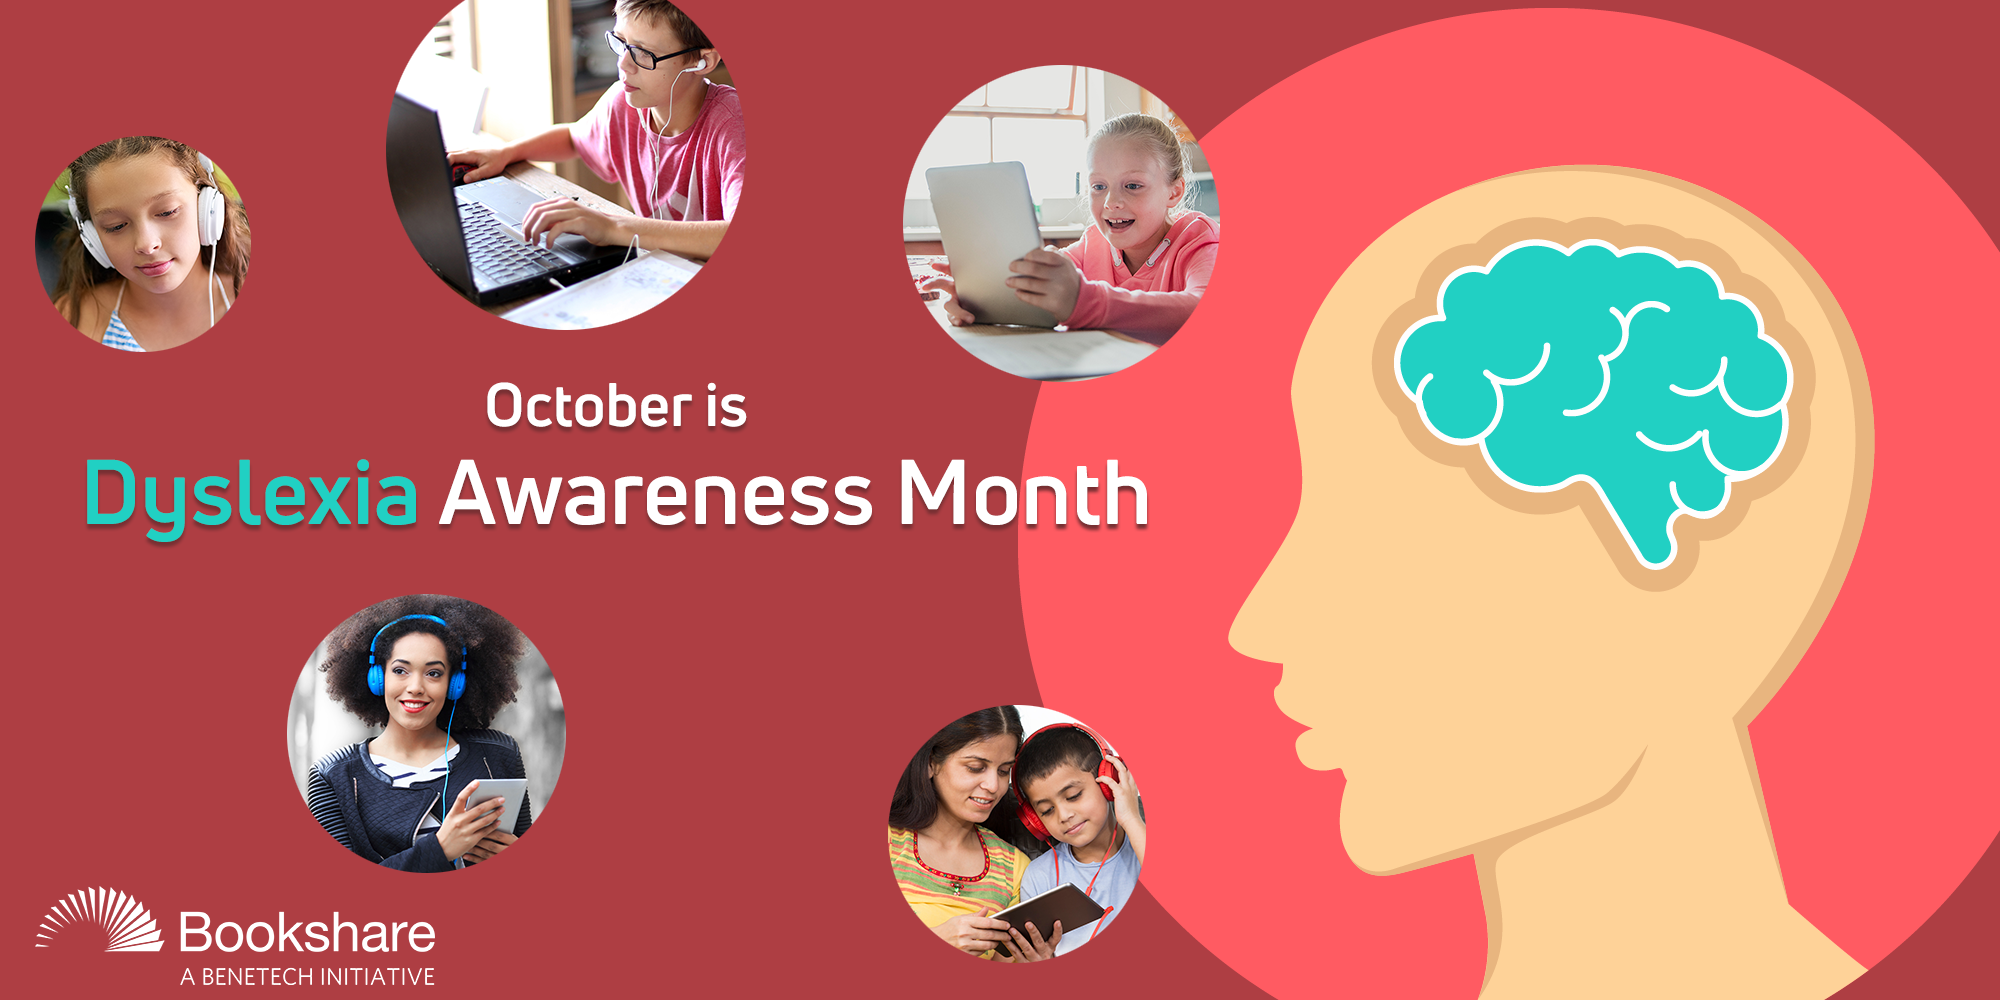 October is Dyslexia Awareness Month is surrounded by photos of students reading